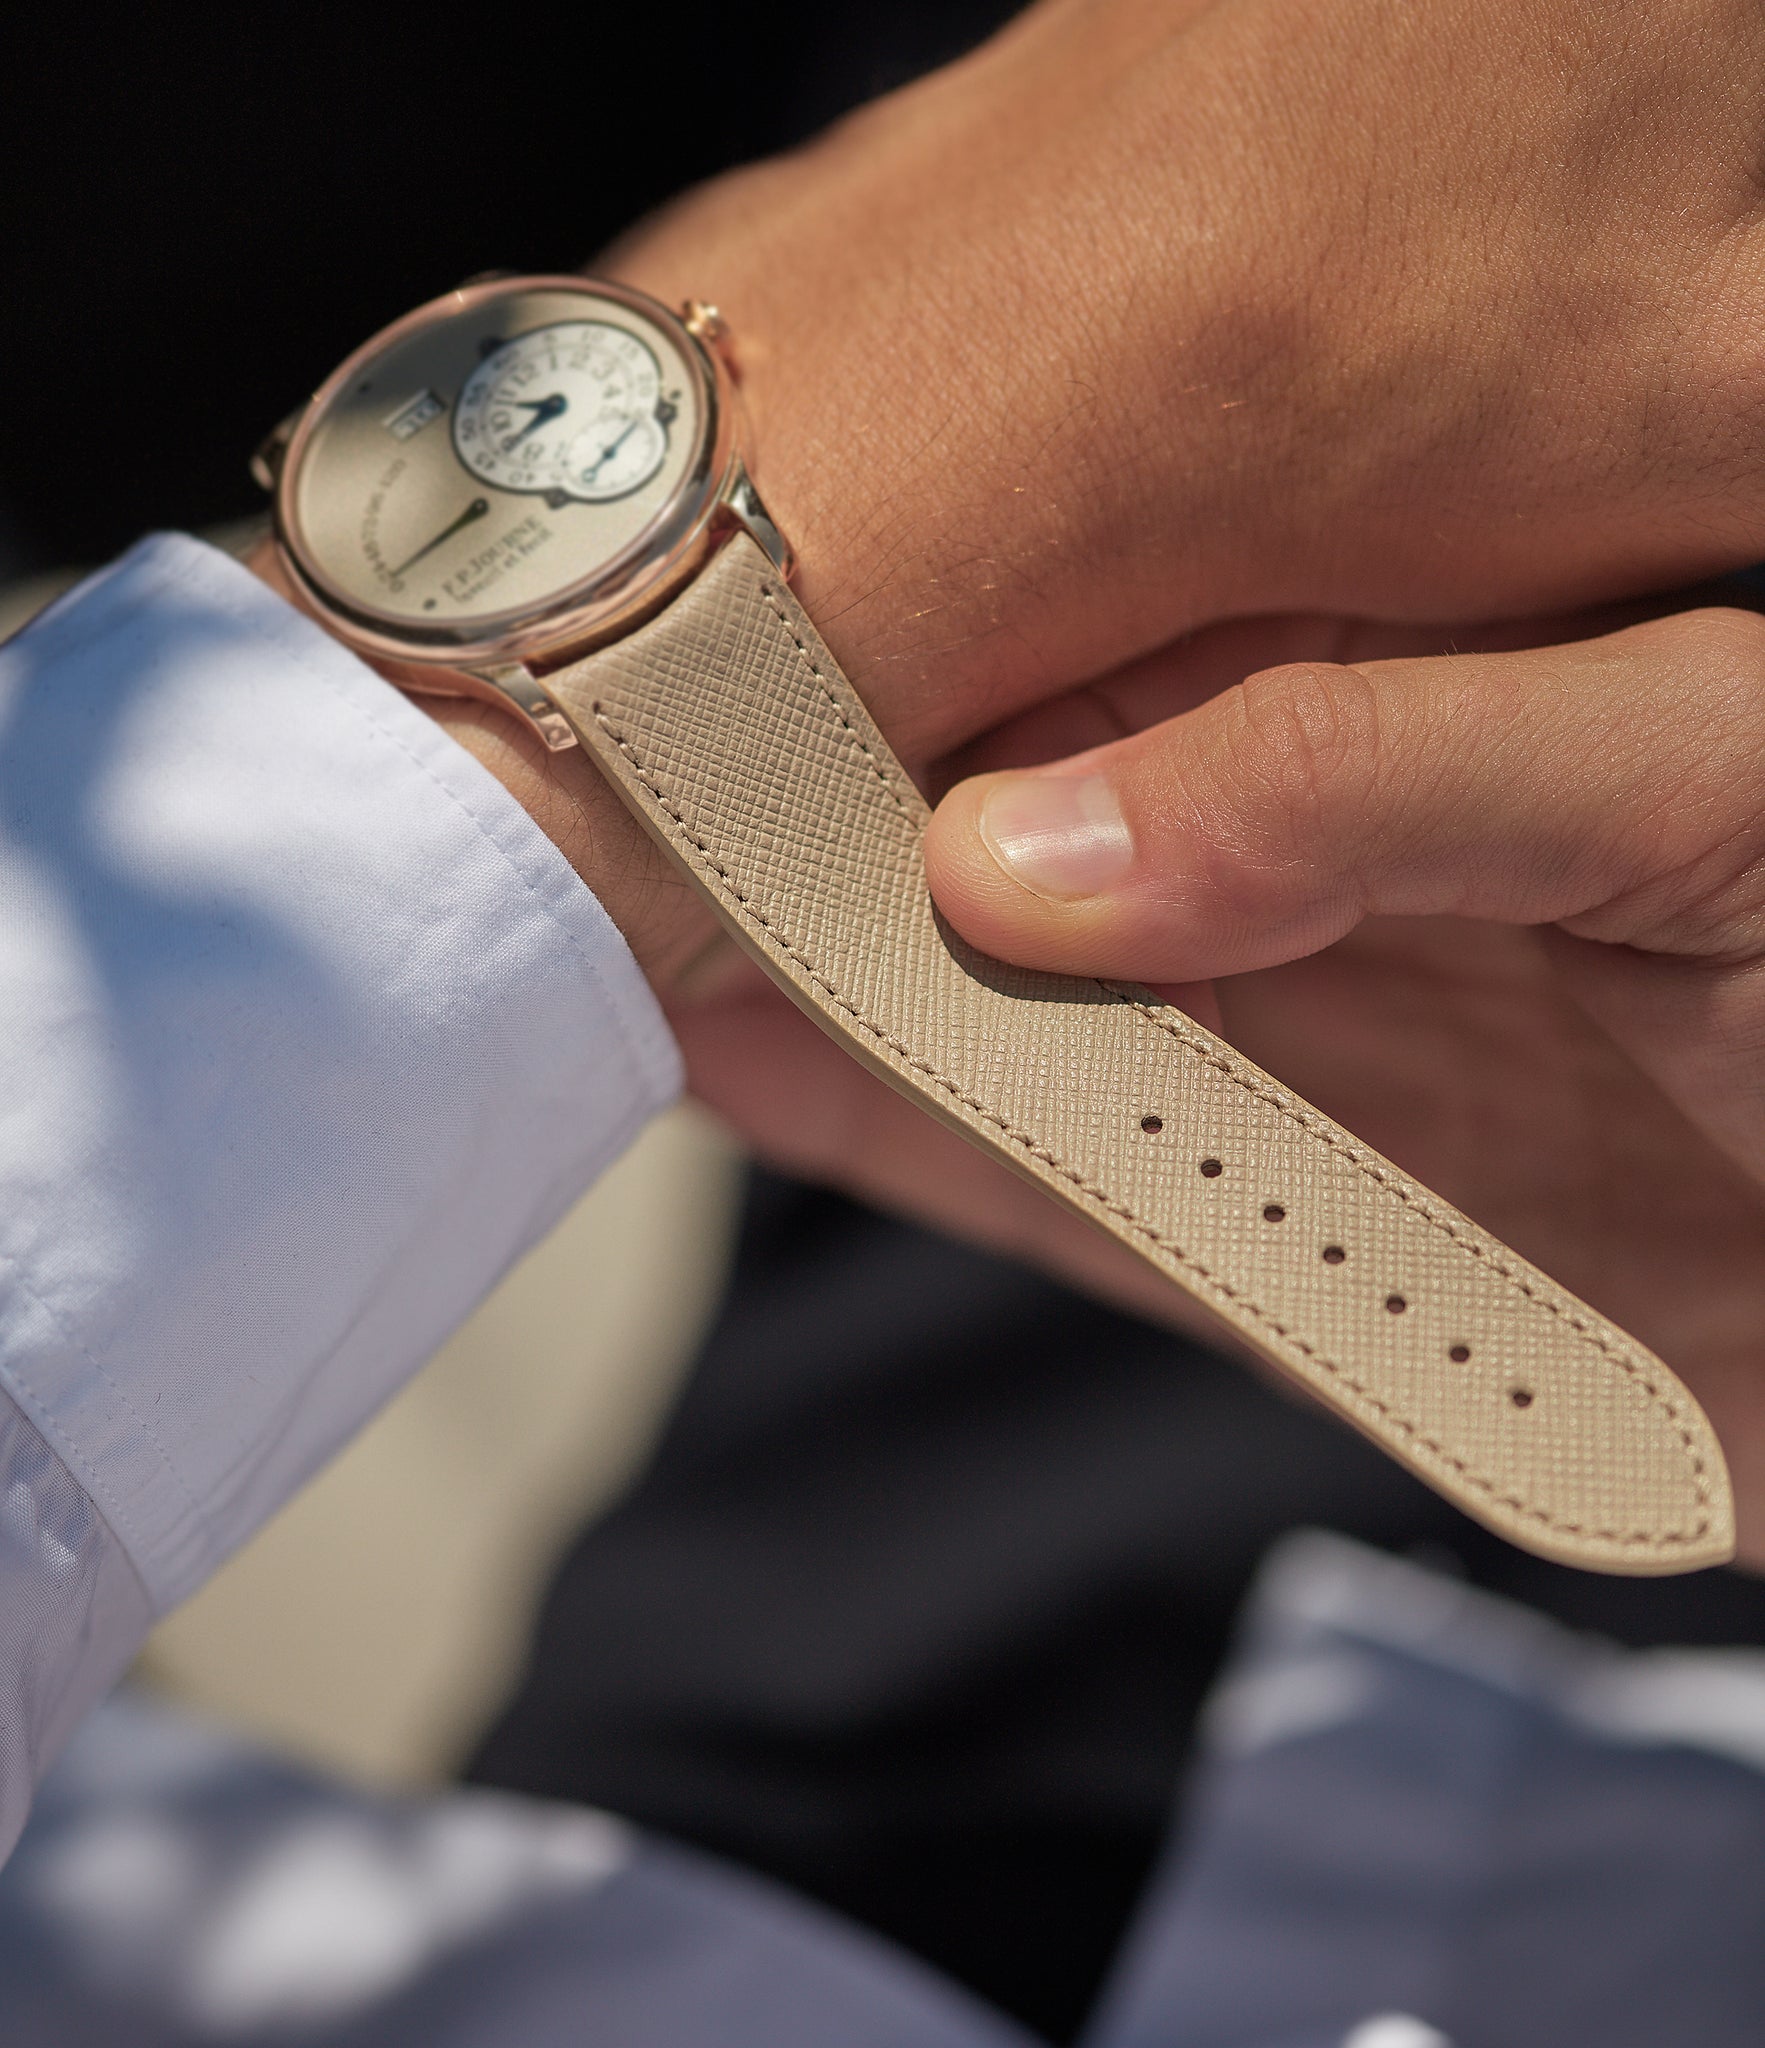 Buy saffiano quality watch strap in desert beige from A Collected Man London, in short or regular lengths. We are proud to offer these hand-crafted watch straps, thoughtfully made in Europe, to suit your watch. Available to order online for worldwide delivery.